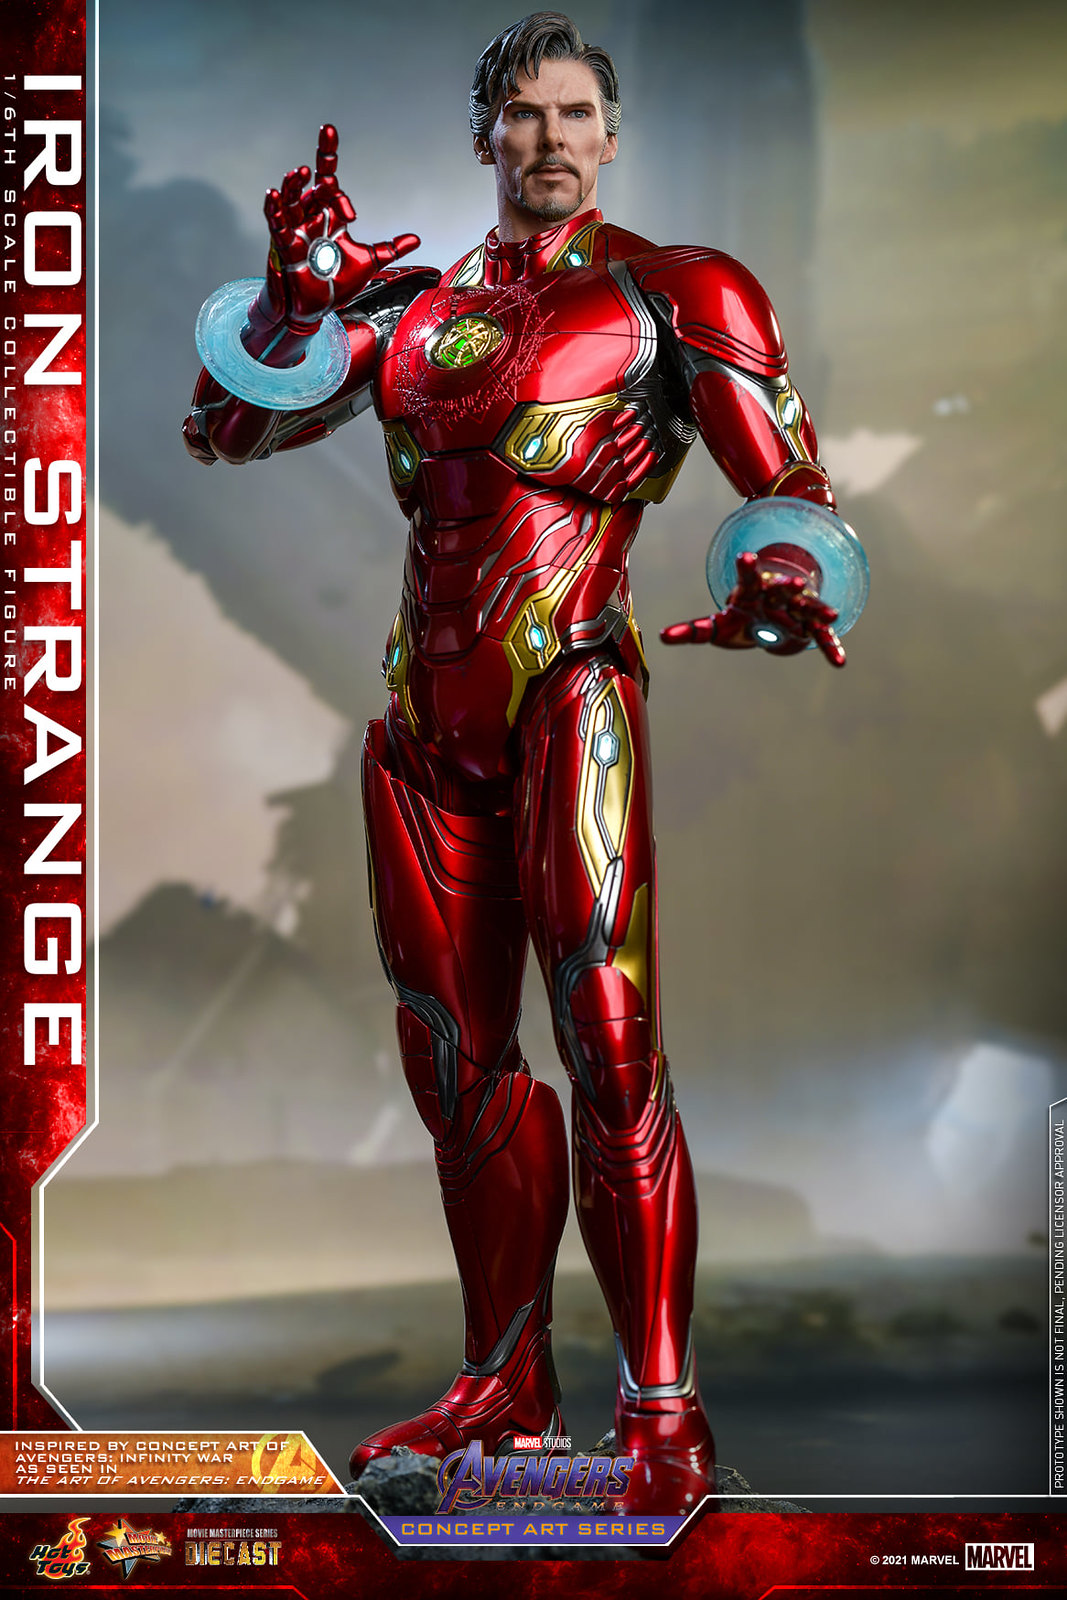 NEW PRODUCT: Hot Toys Avengers: Endgame (Concept Art Series) - 1/6th scale Iron Strange Collectible Figure 51311429848_a281cc3e6a_h